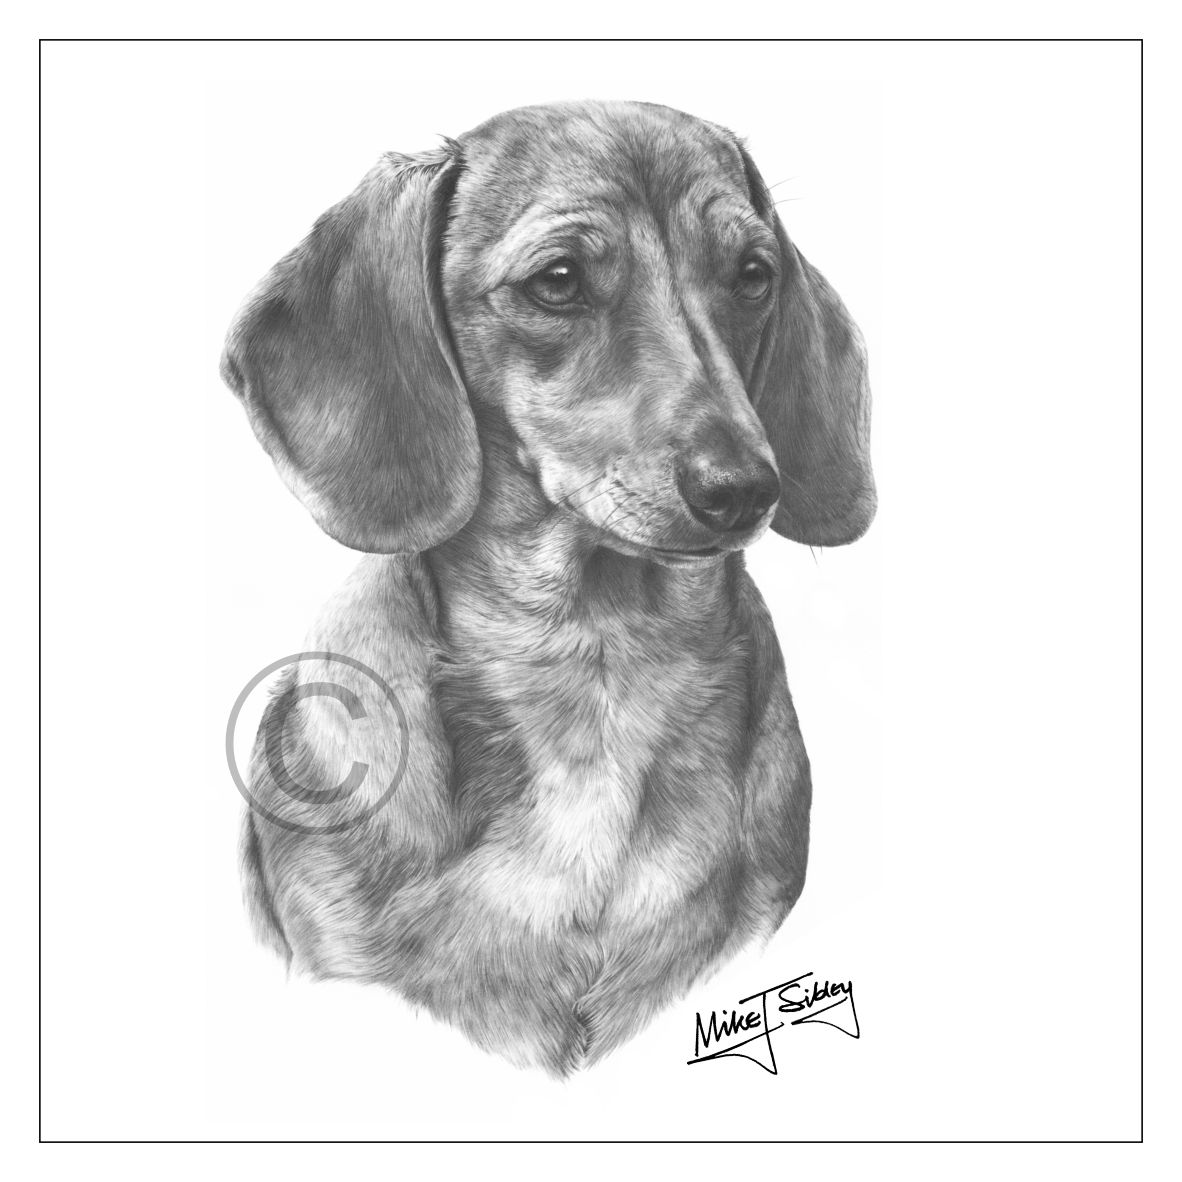 Mike Sibley Design Smooth Haired Dachshund Greeting Card